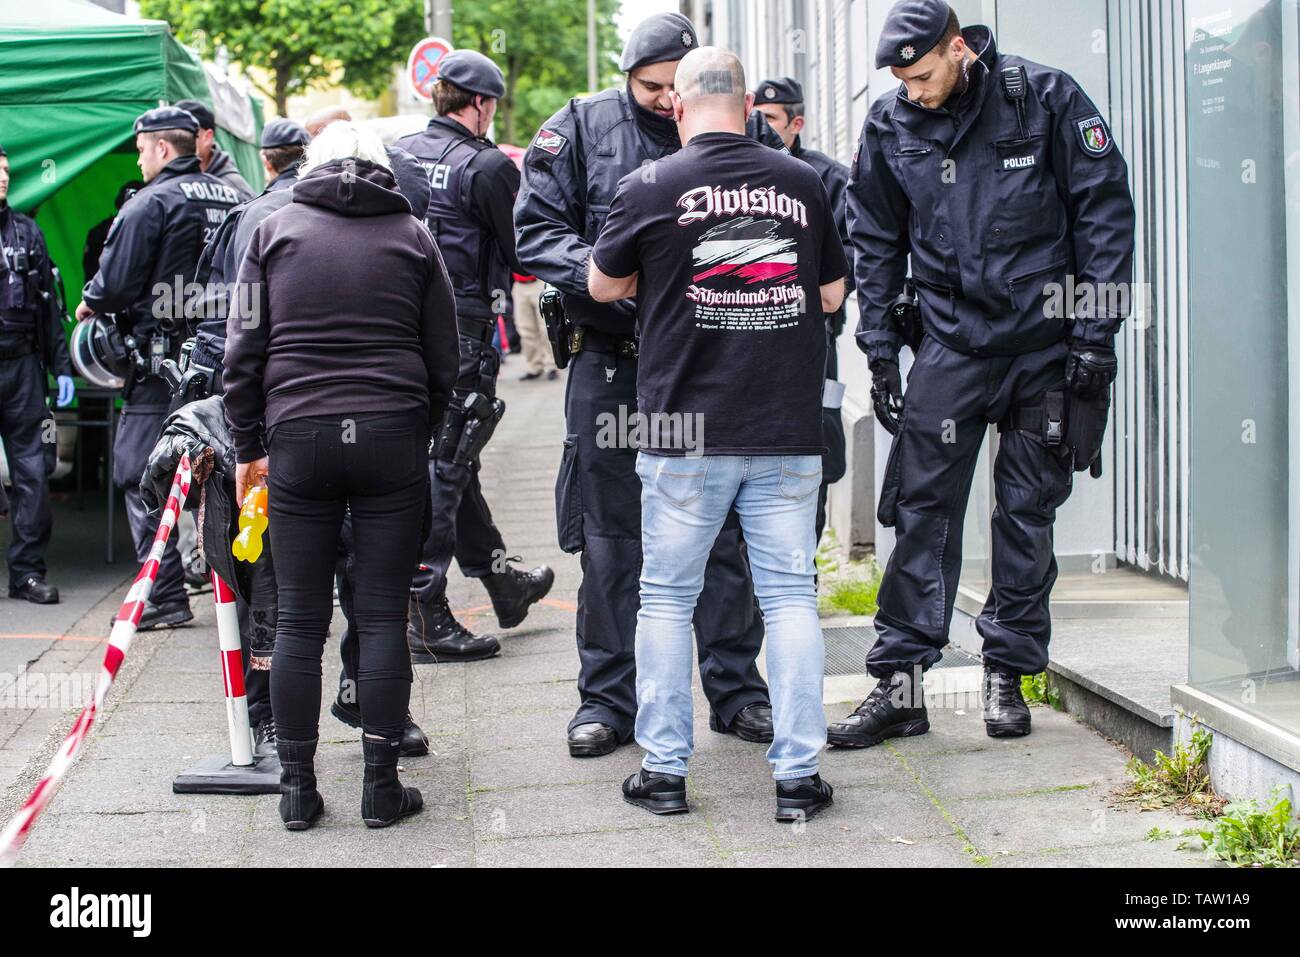 Dortmund, Nordrhein Westfalen, Germany. 25th May, 2019. Neonazis in Dortmund, Germany arrive for a demonstration where there were checks by police commandos for weapons and contraband. Prior to the European Elections, the neonazi party Die Rechte (The Right) organized a rally in the German city of Dortmund to promote their candidate, the incarcerated Holocaust denier Ursula Haverbeck. The demonstration and march were organized by prominent local political figure and neonazi activist Michael Brueck (Michael BrÃ¼ck) who enlisted the help of not only German neonazis, but also assistance from Ru Stock Photo